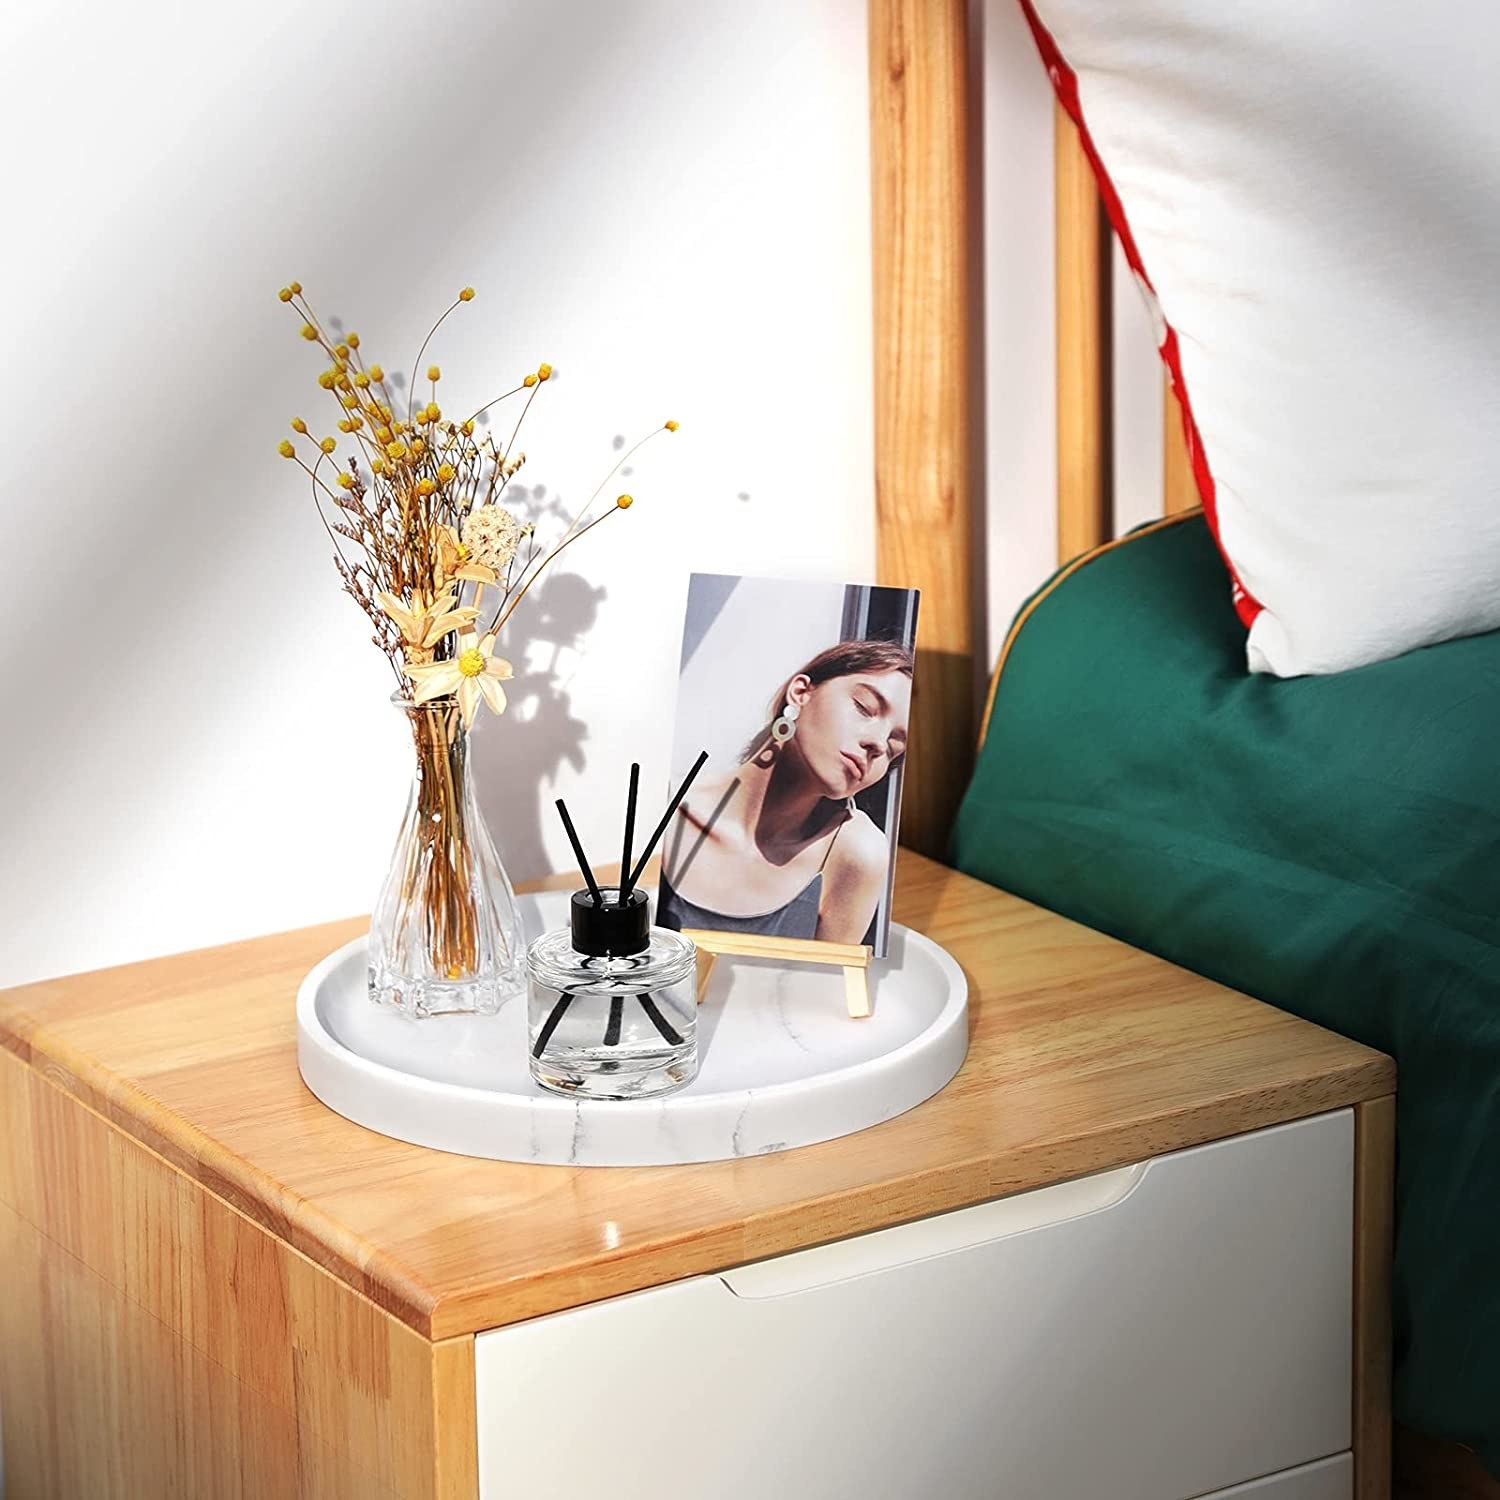 The tray with flowers, a picture, and a diffuser on it on a bedside table